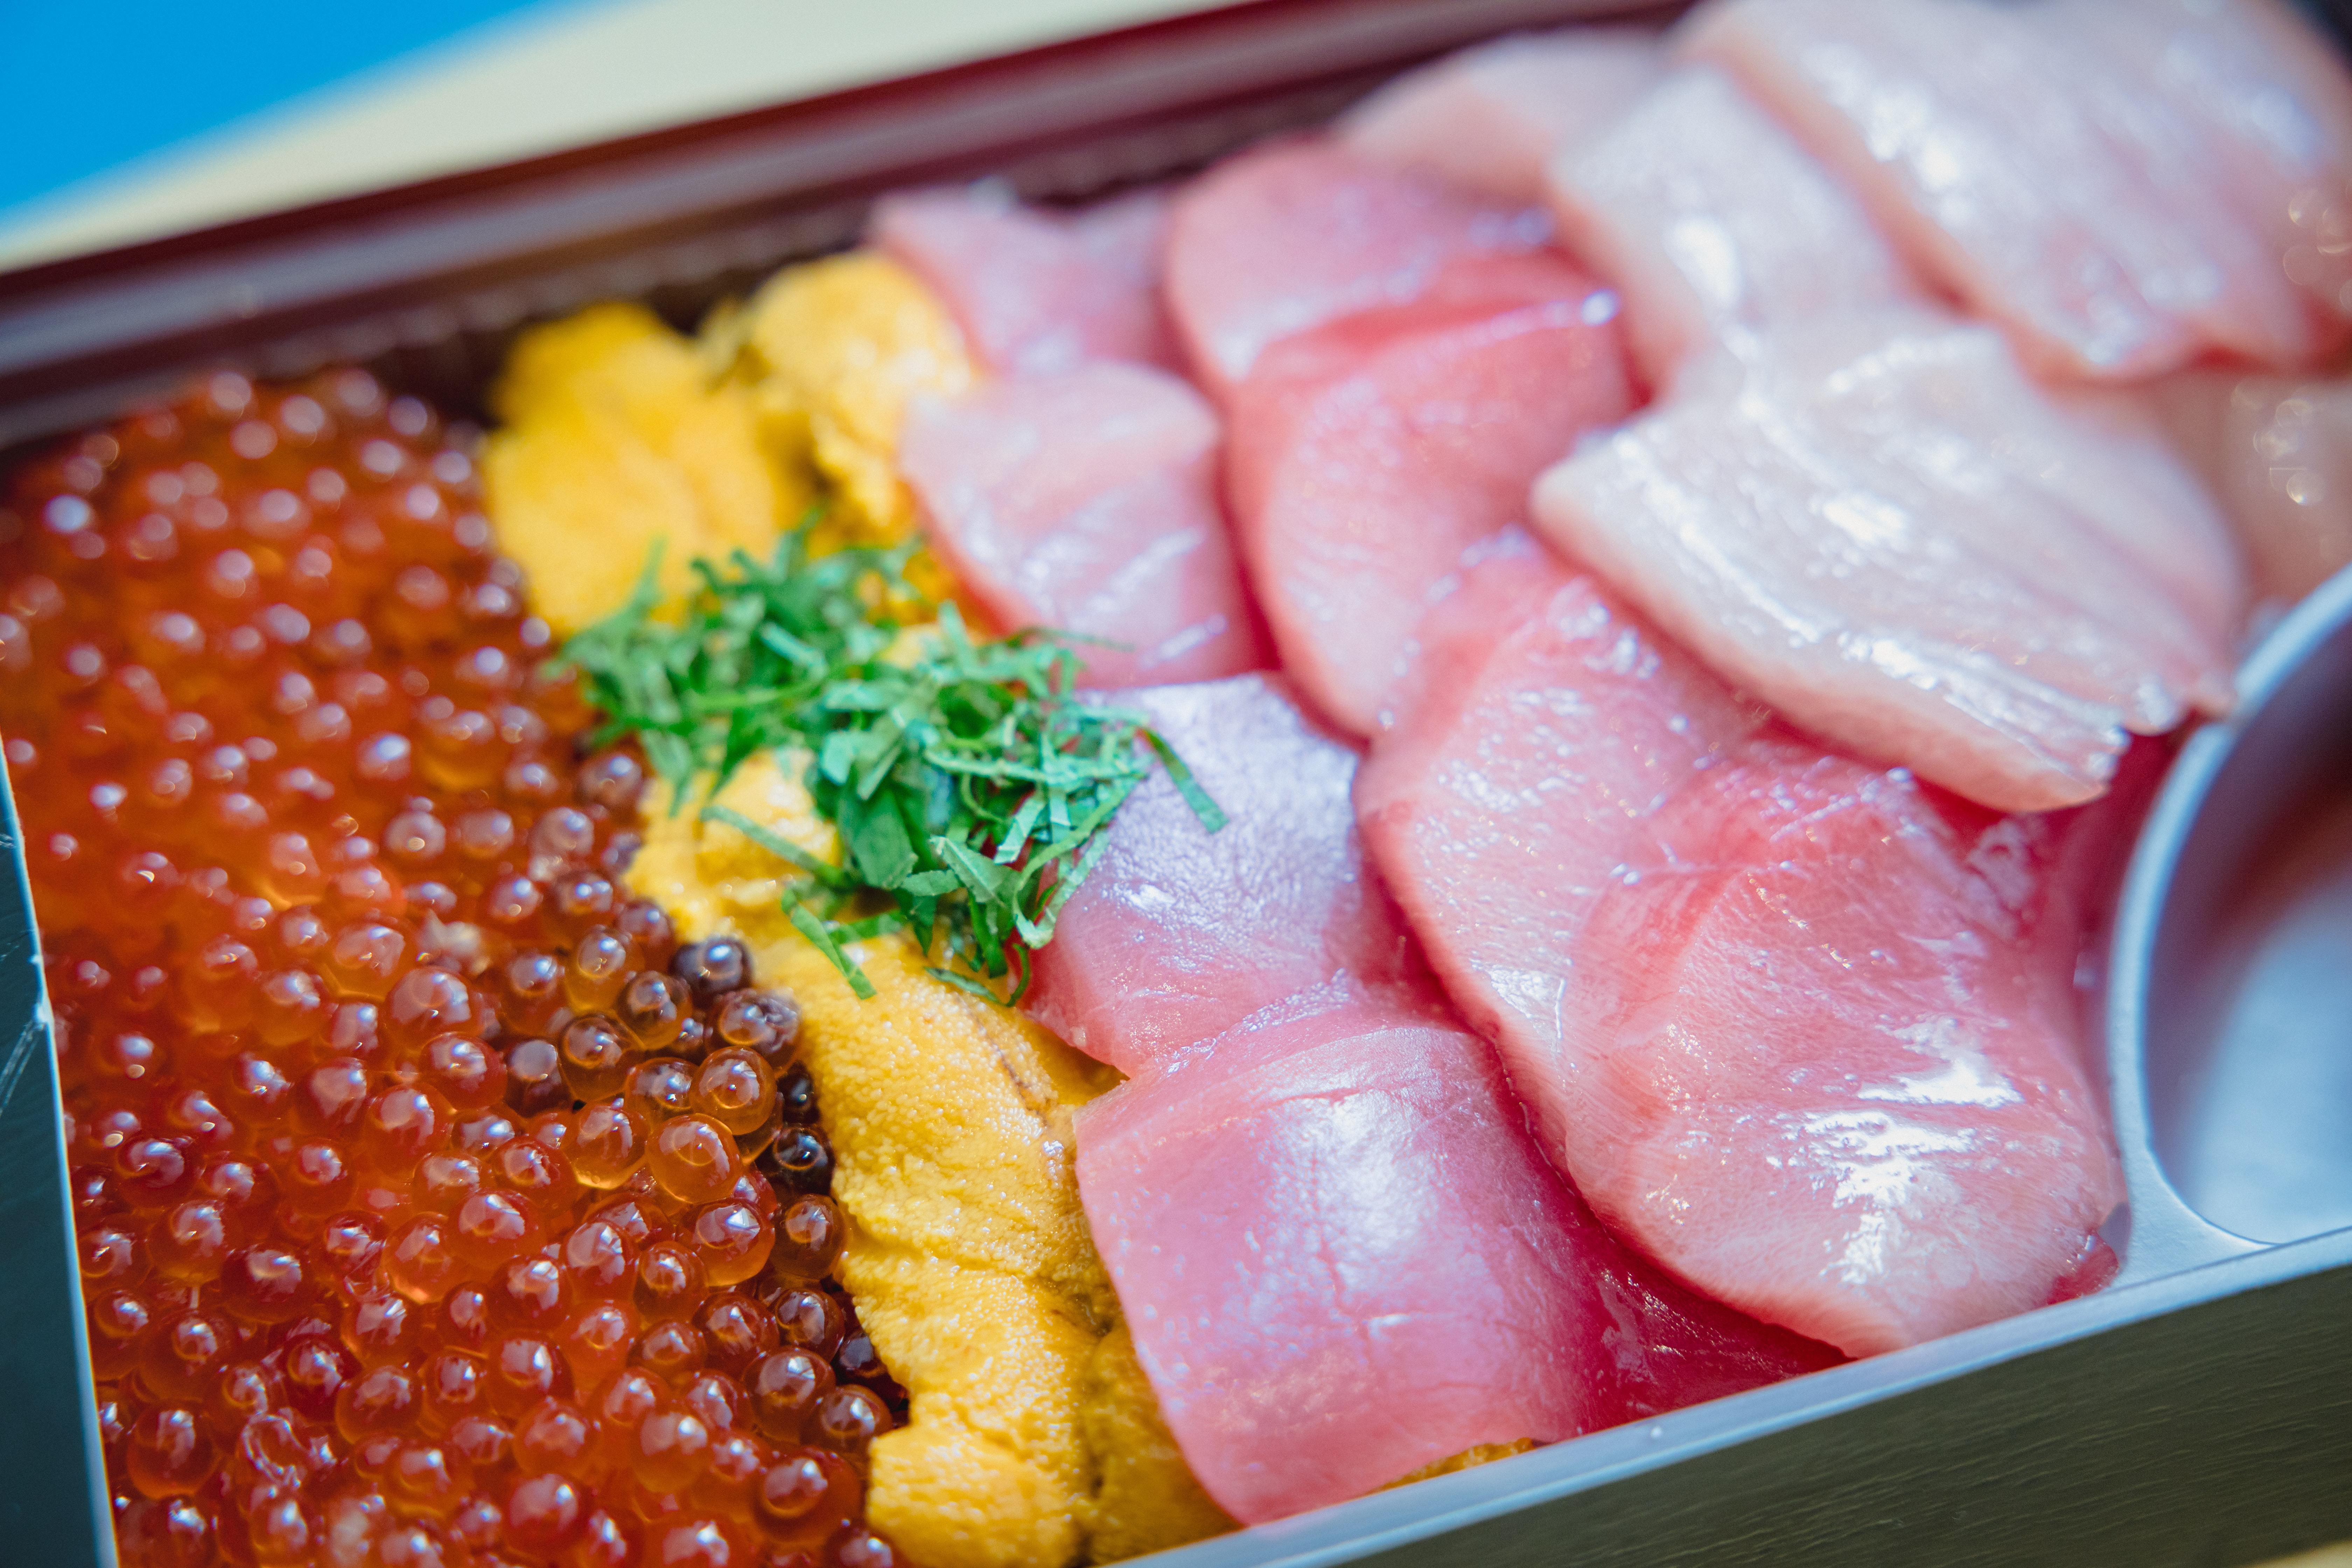 A plate of fish eggs and slices of raw fish - a delight to the sushi lover.